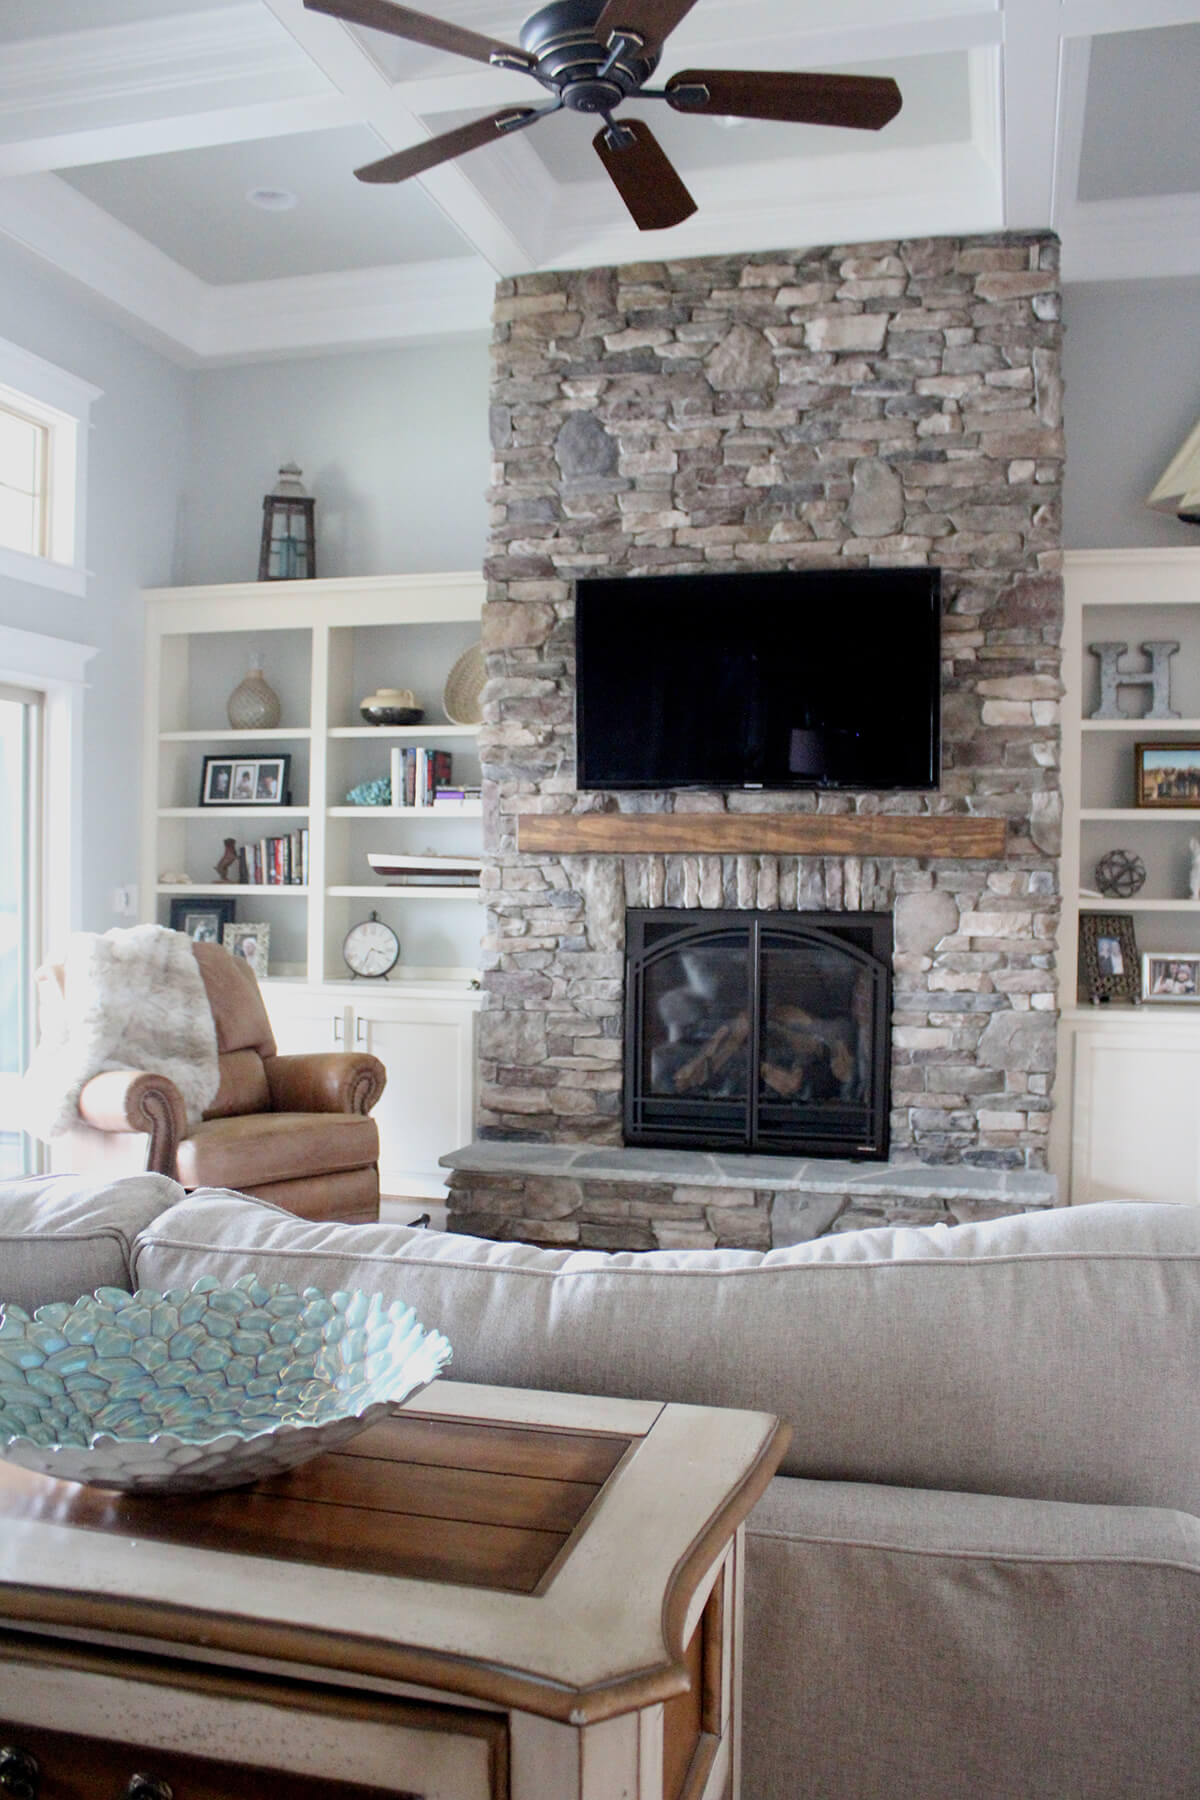 Impressive Rustic Stacked Stone Floor-to-Ceiling Fireplace